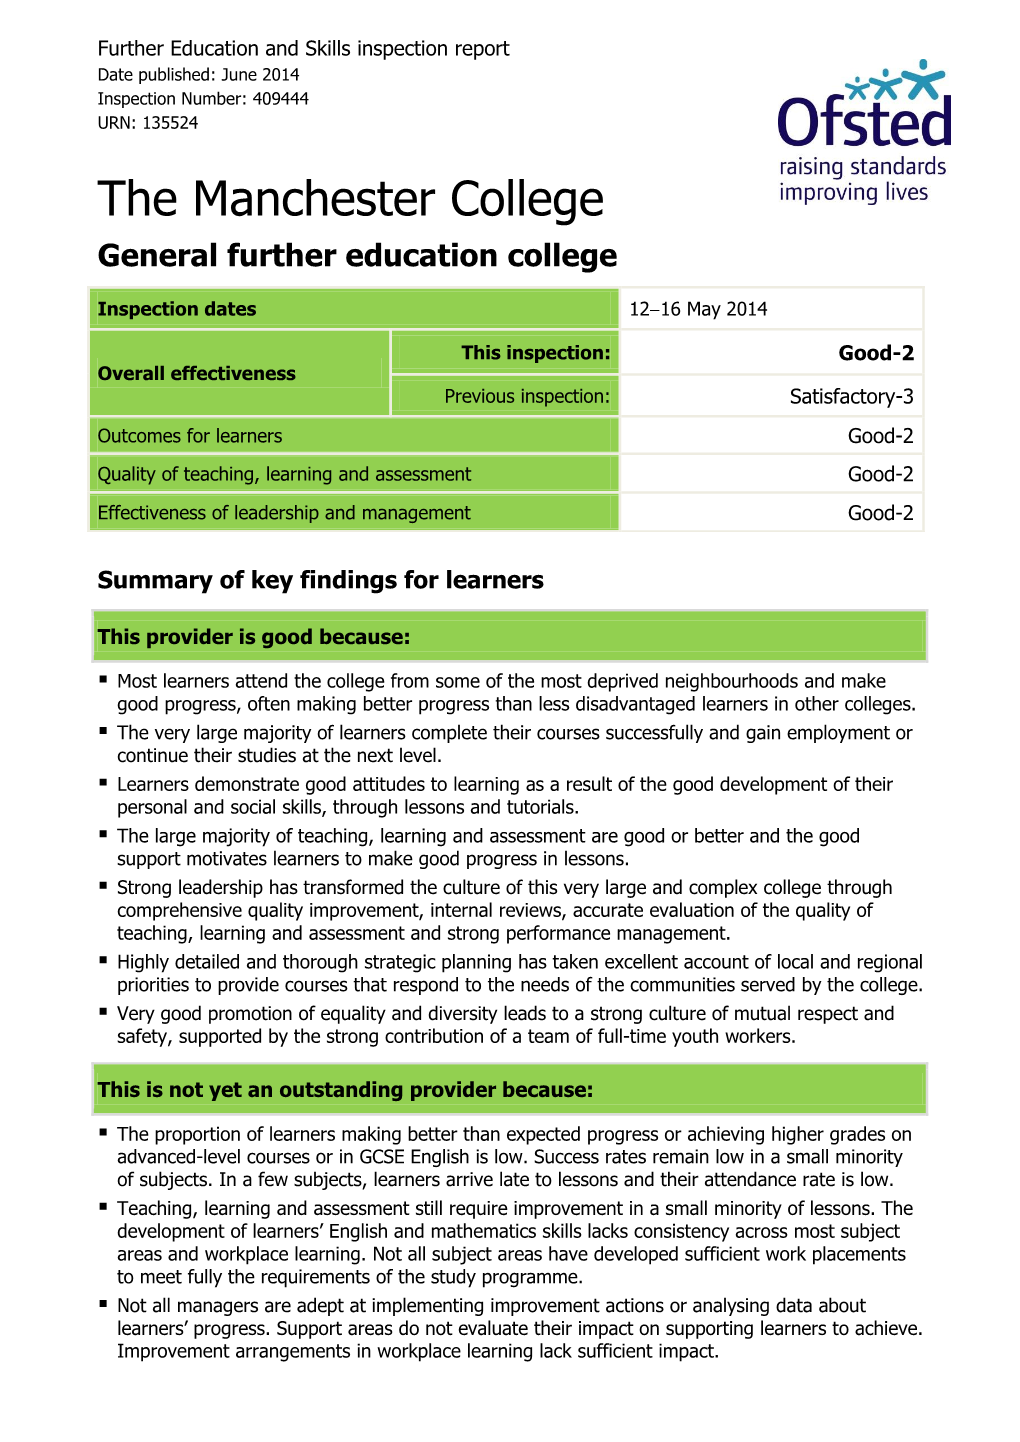 The Manchester College General Further Education College